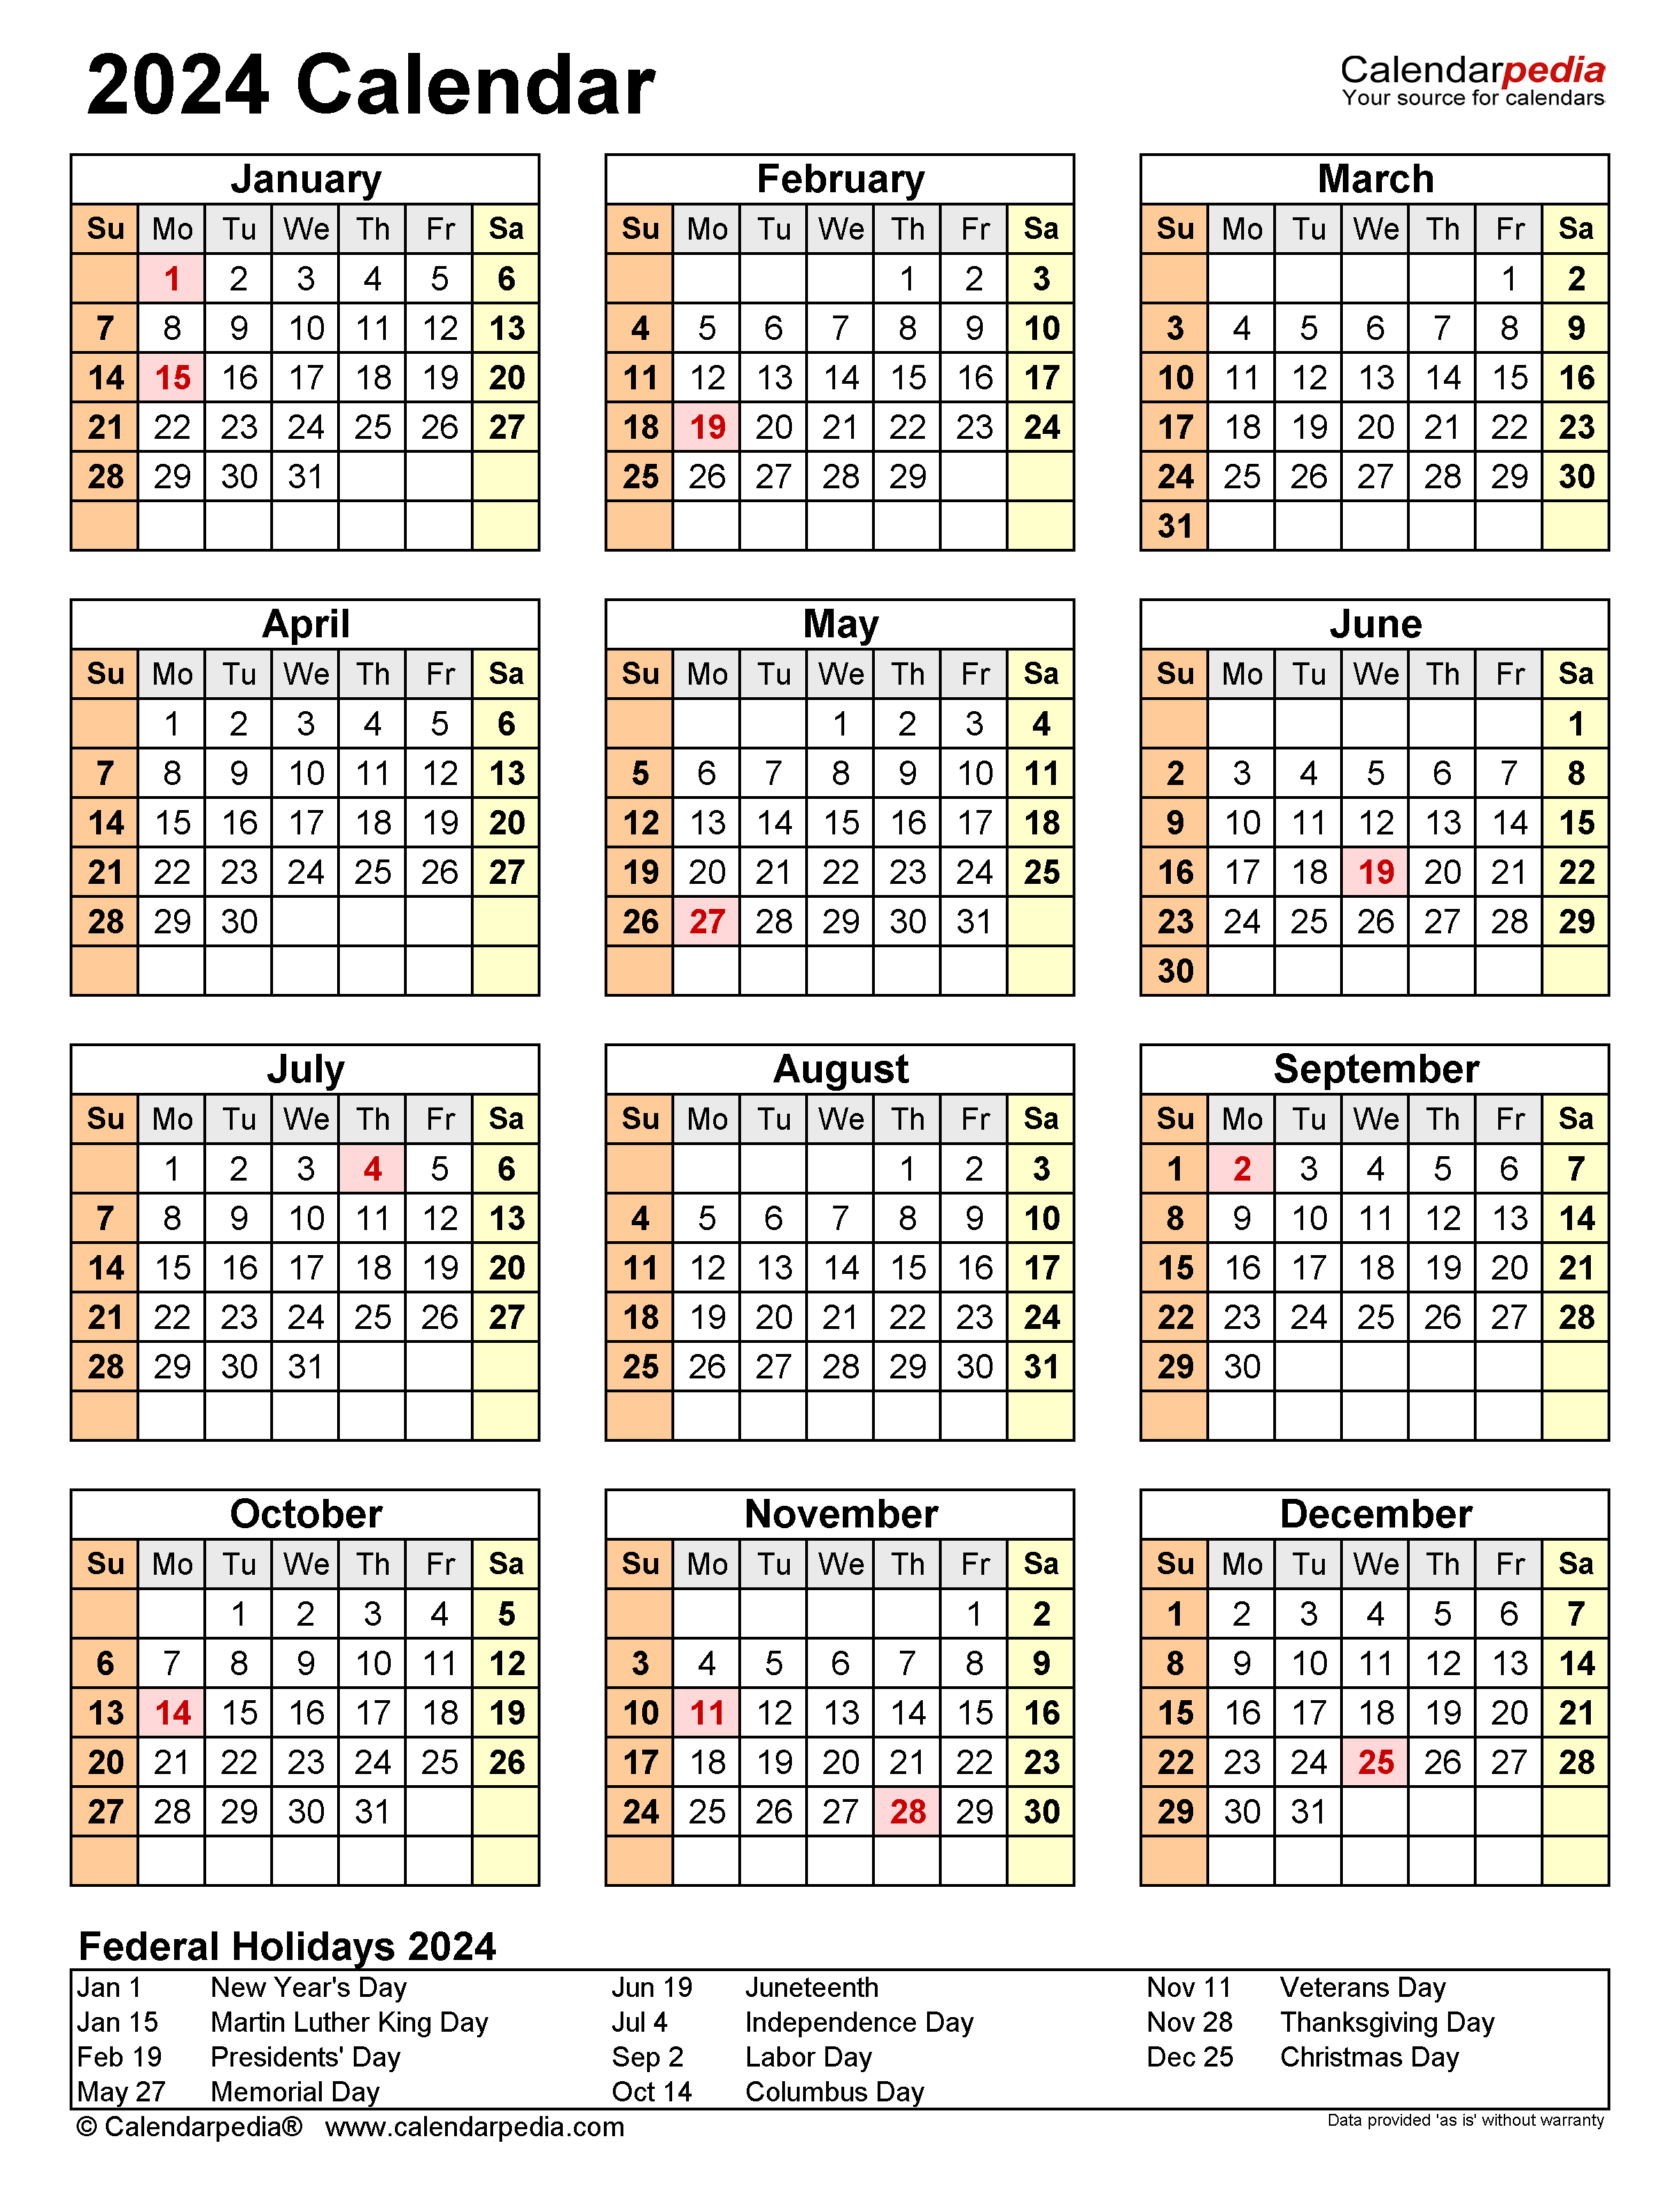 Free Printable 2024 Calendar With Holidays Crownflourmills | Free Printable 2024 Calendar With Holidays And Notes